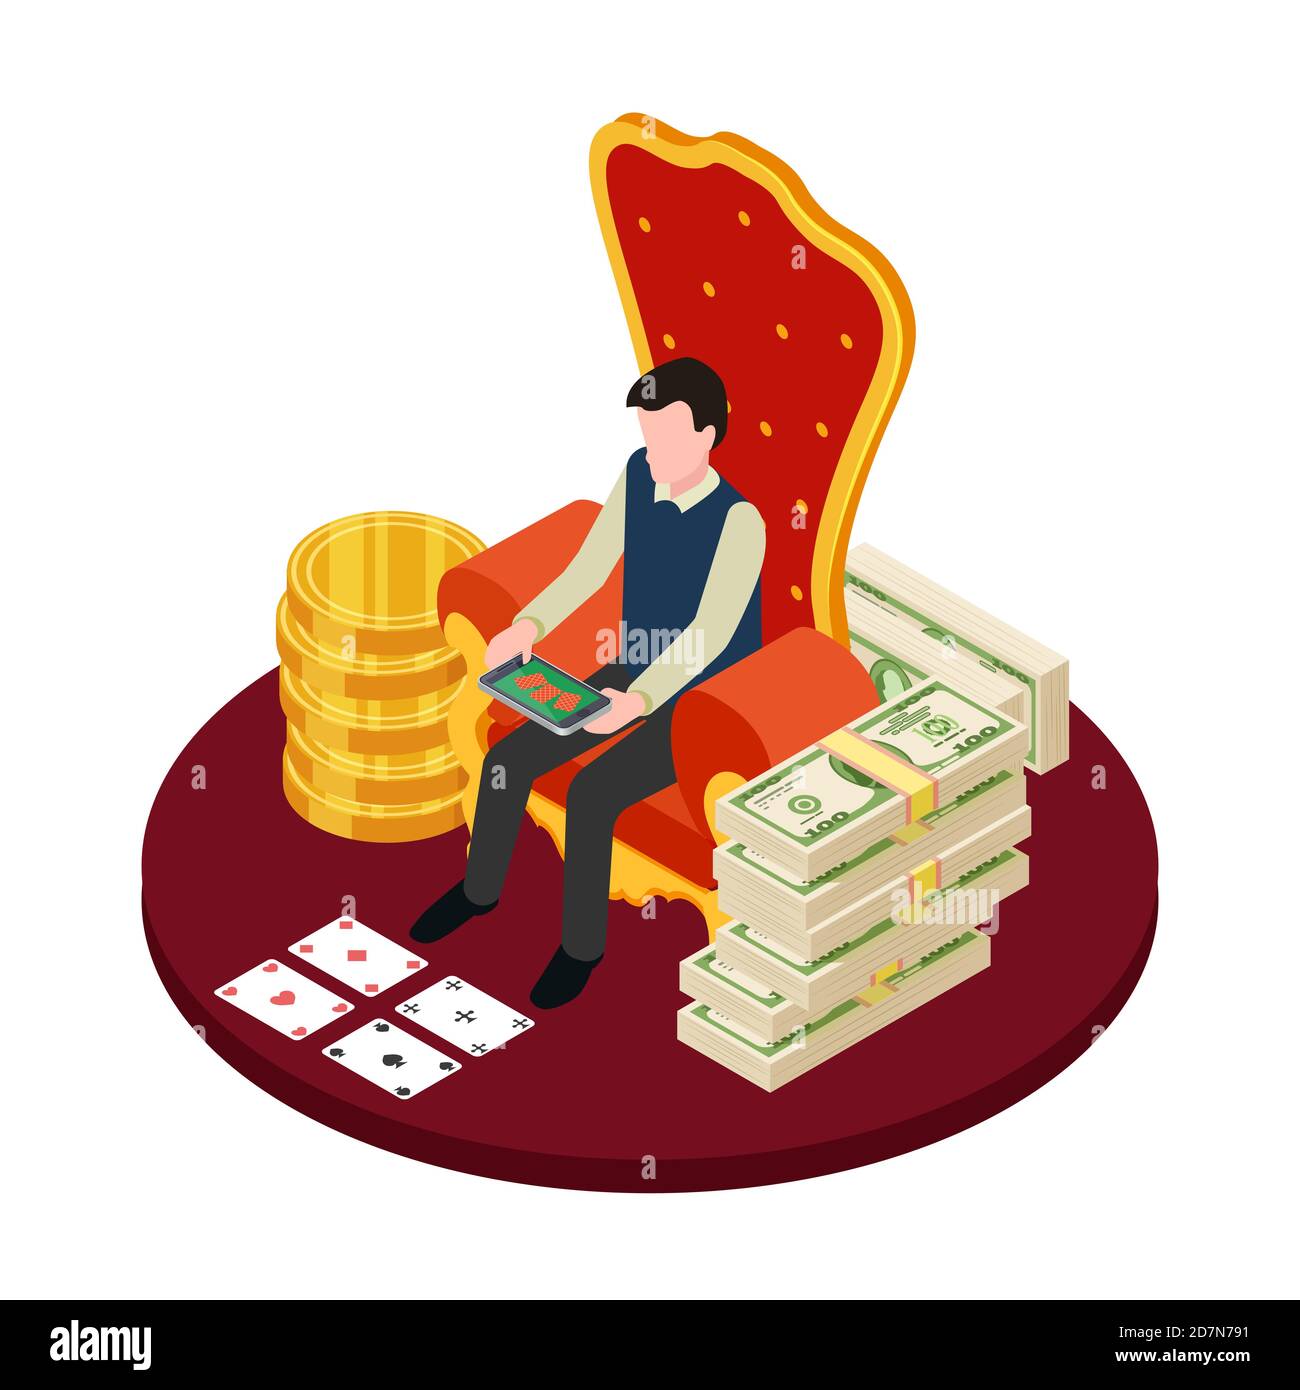 Online casino with banknotes, coins and man with tablet isometric vector illustration. Casino game online, gambling and fortune Stock Vector